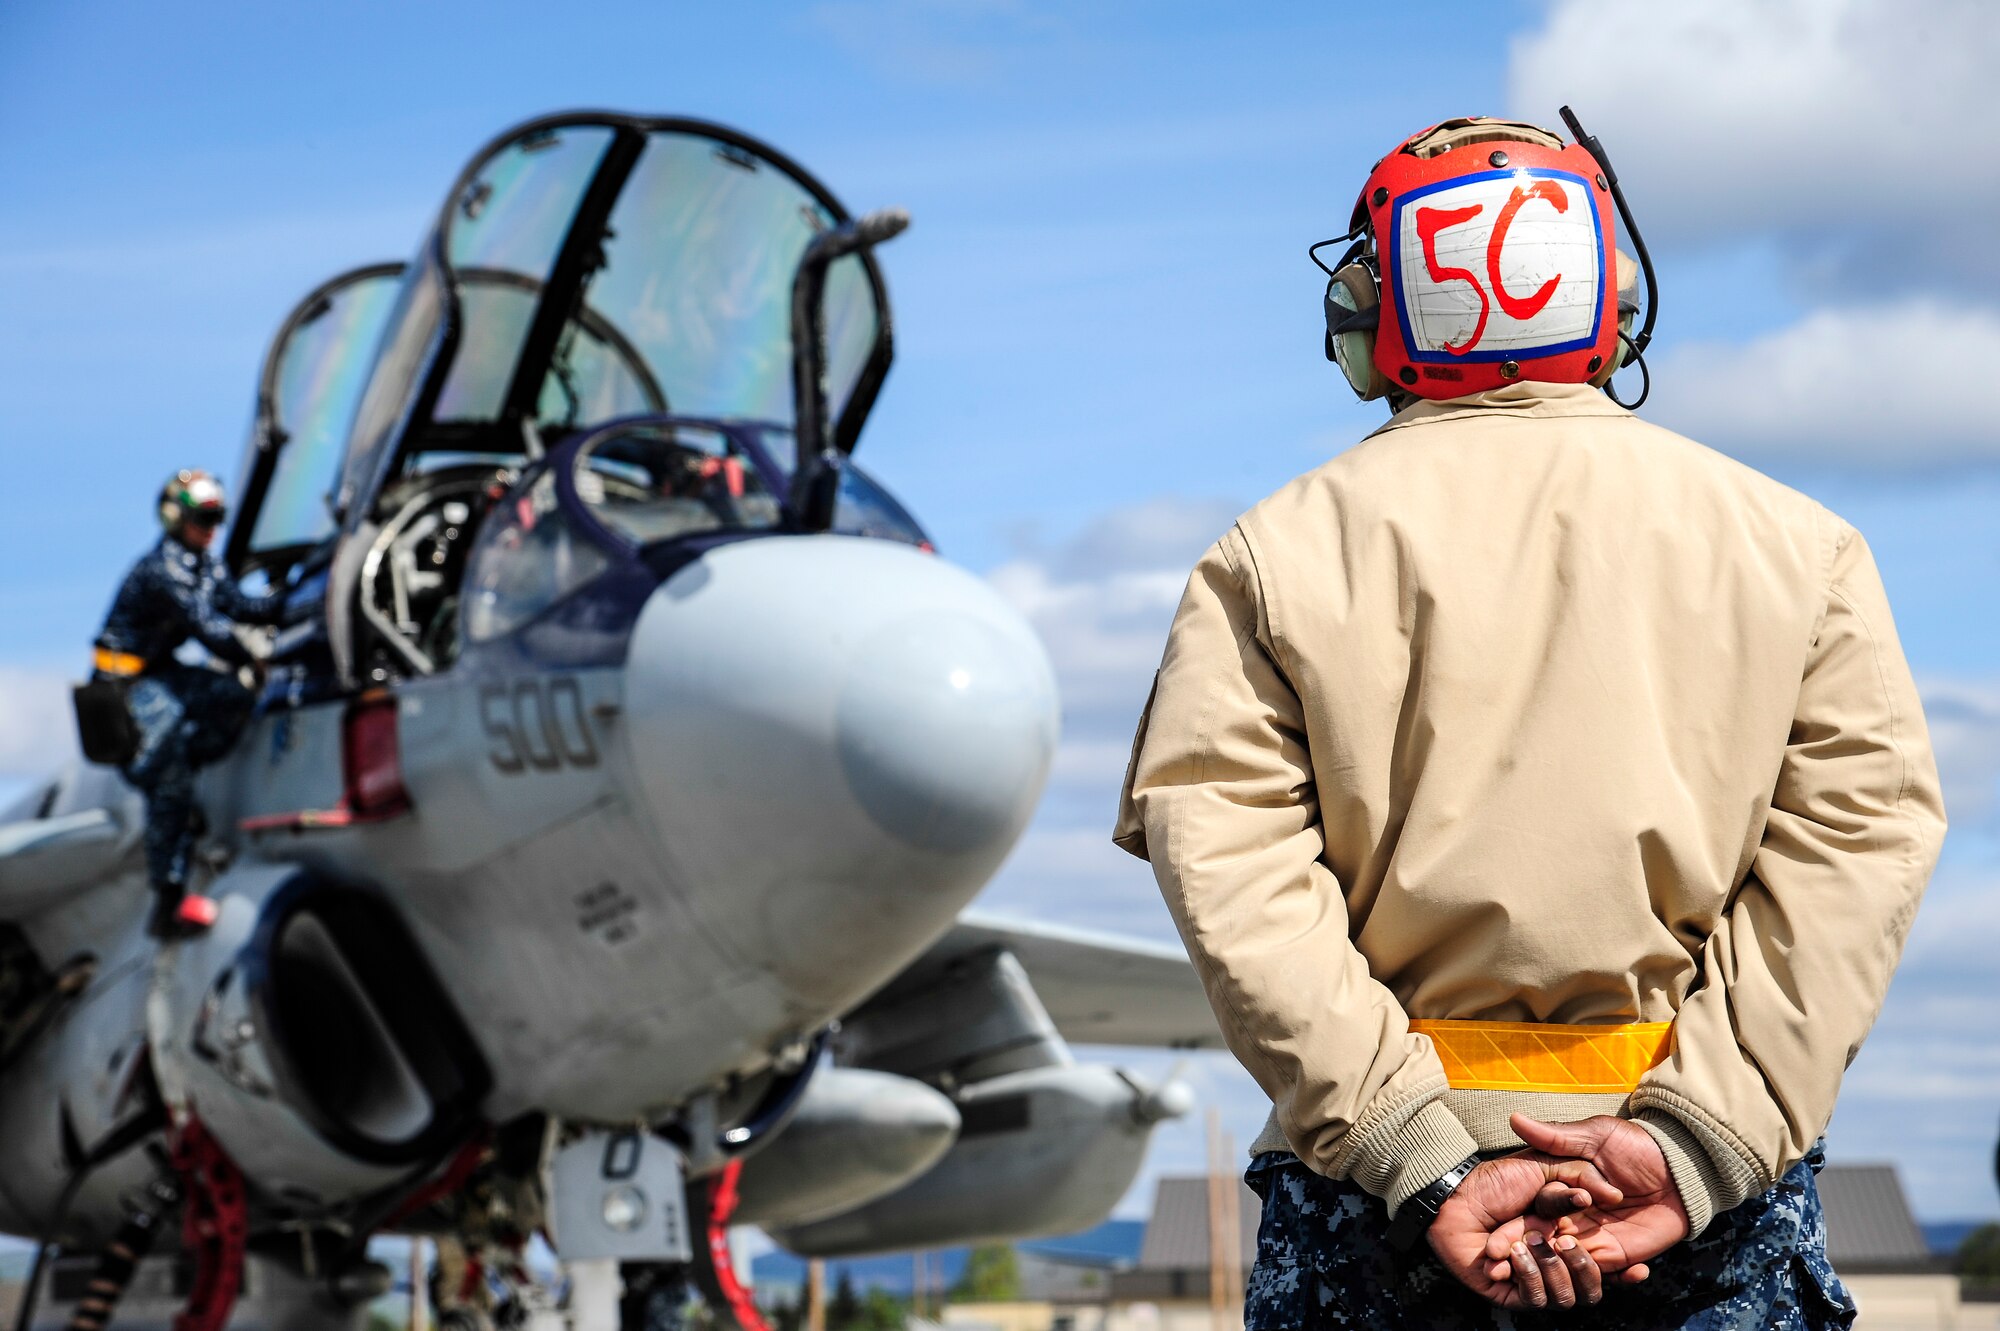 A U.S. Navy EA-6B Prowler crew chief from the Electronic Attack Squadron 142, Naval Air Station Whidbey Island, Oak Harbor, Wash., stands by as other crew chiefs perform preflight procedures during RED FLAG-Alaska 14-1 May 21, 2014, Eielson Air Force Base Alaska. The Prowler carries out missions by jamming enemy radar systems and gathering radio intelligence on enemy air defense systems. (U.S. Air Force photo by Senior Airman Zachary Perras/Released)